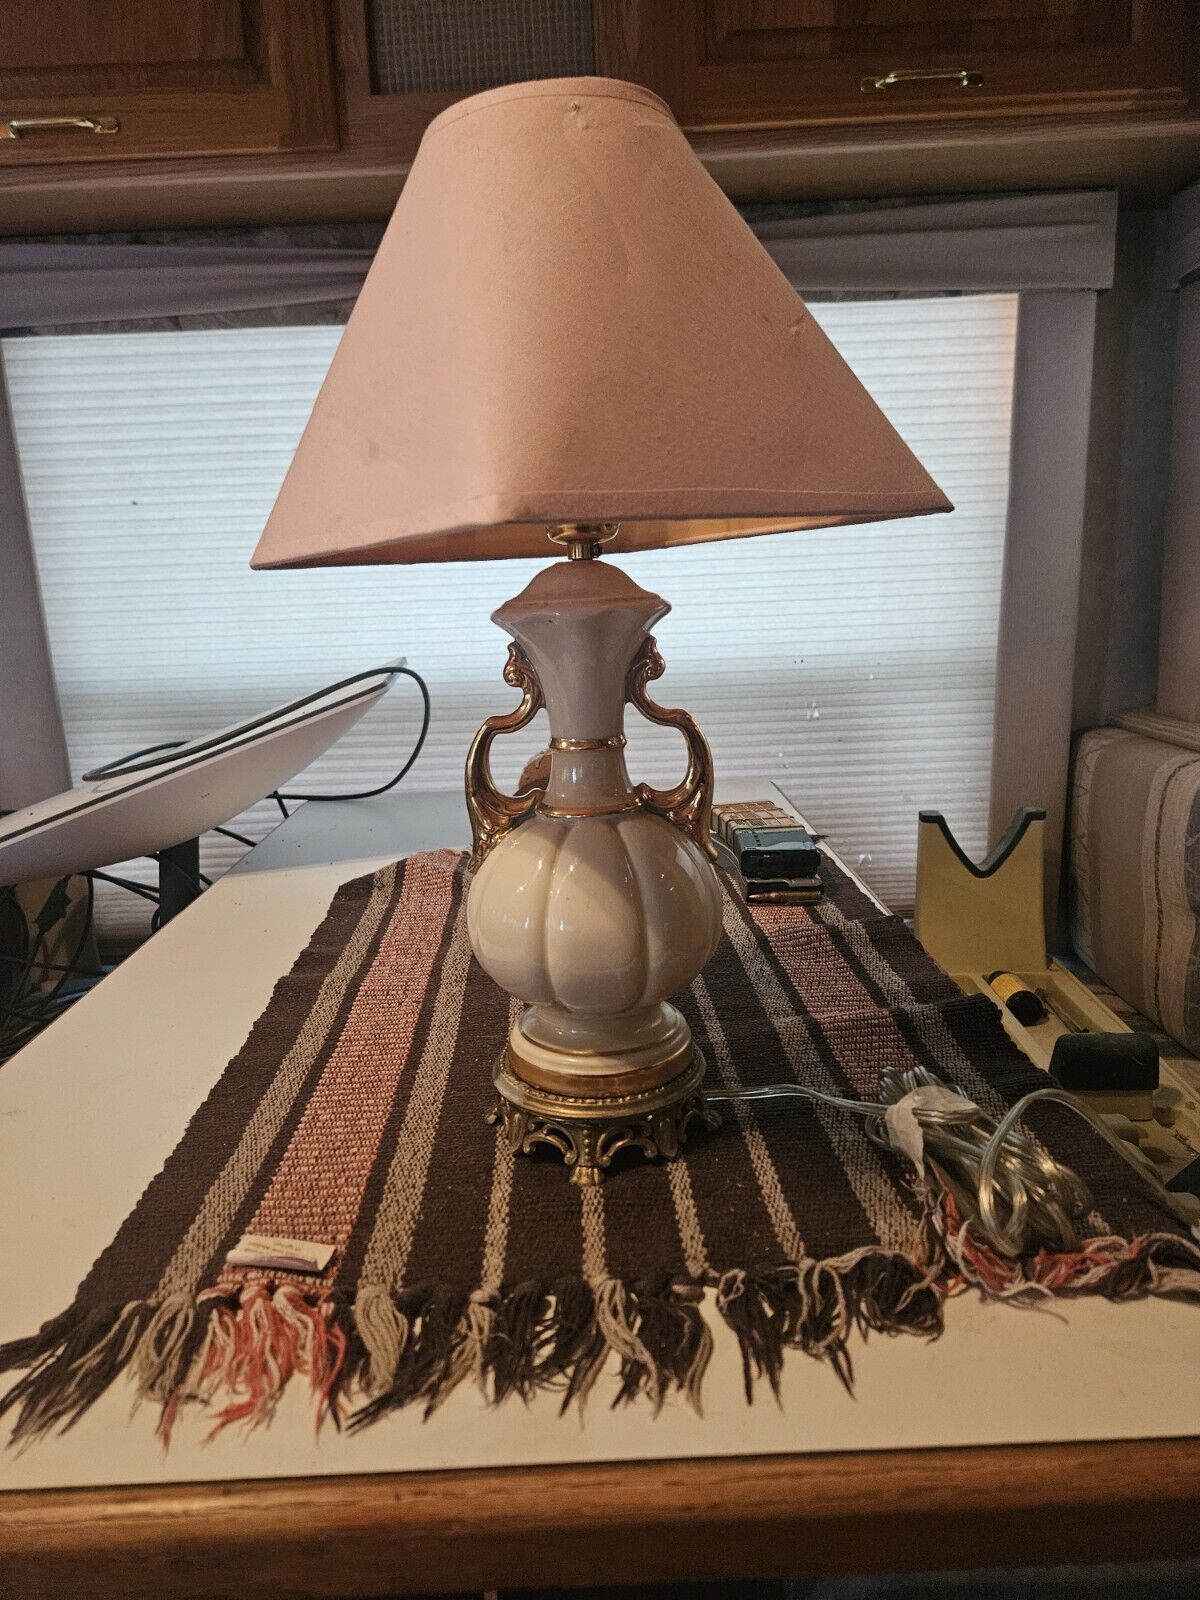 Extremely Rare Deena Lamp, Completely Unique